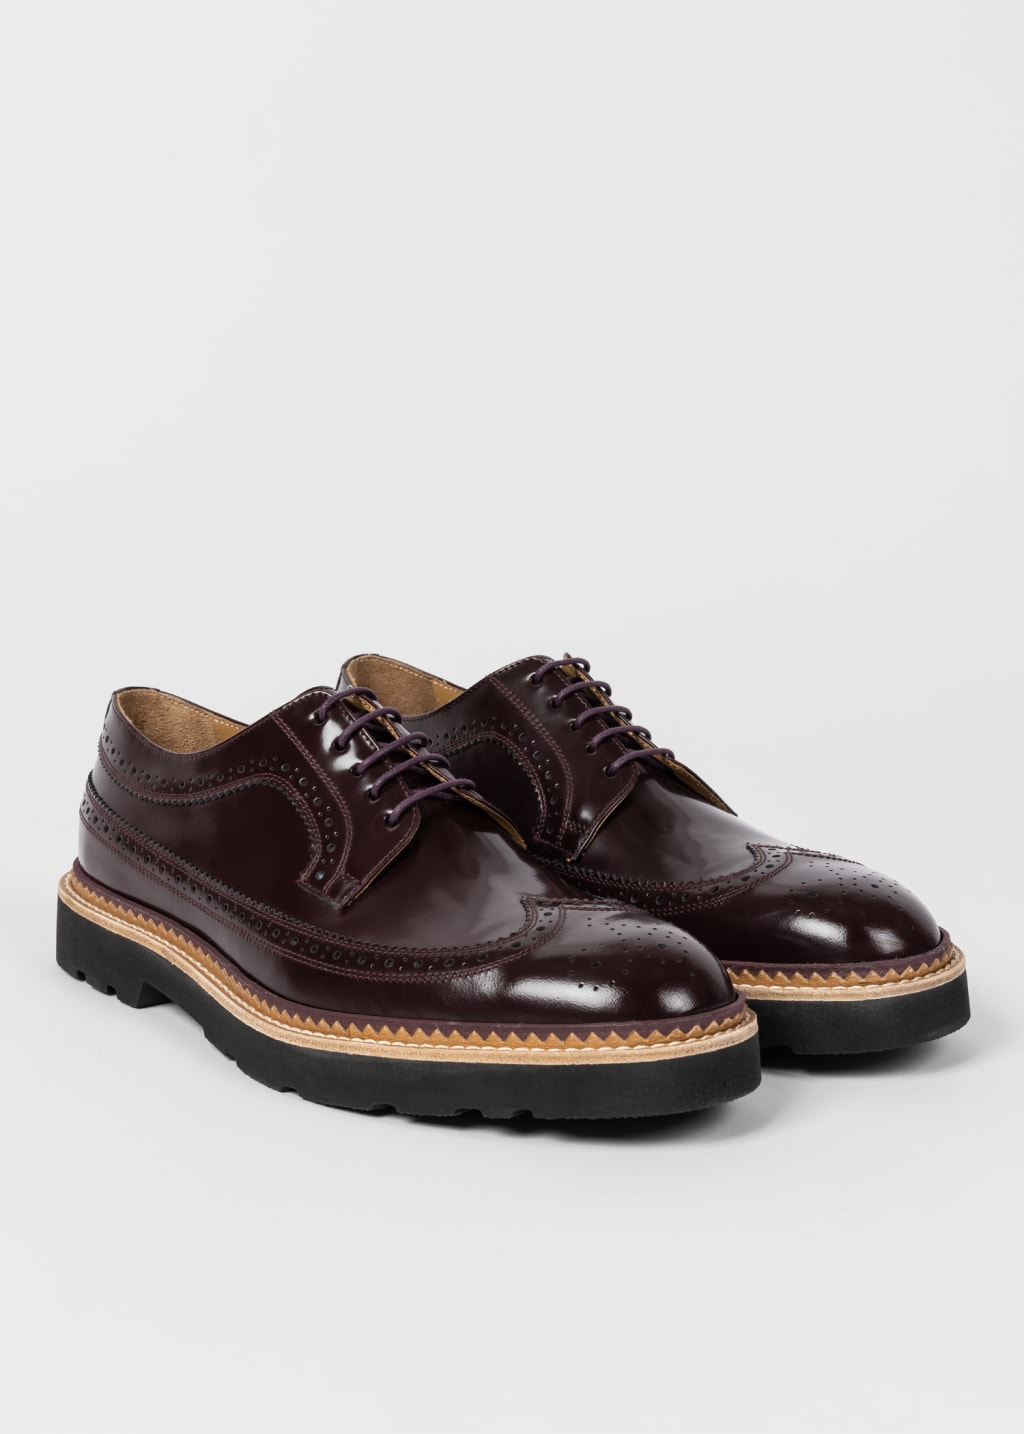 Pair View - Bordeaux High-Shine Leather 'Count' Brogues Paul Smith